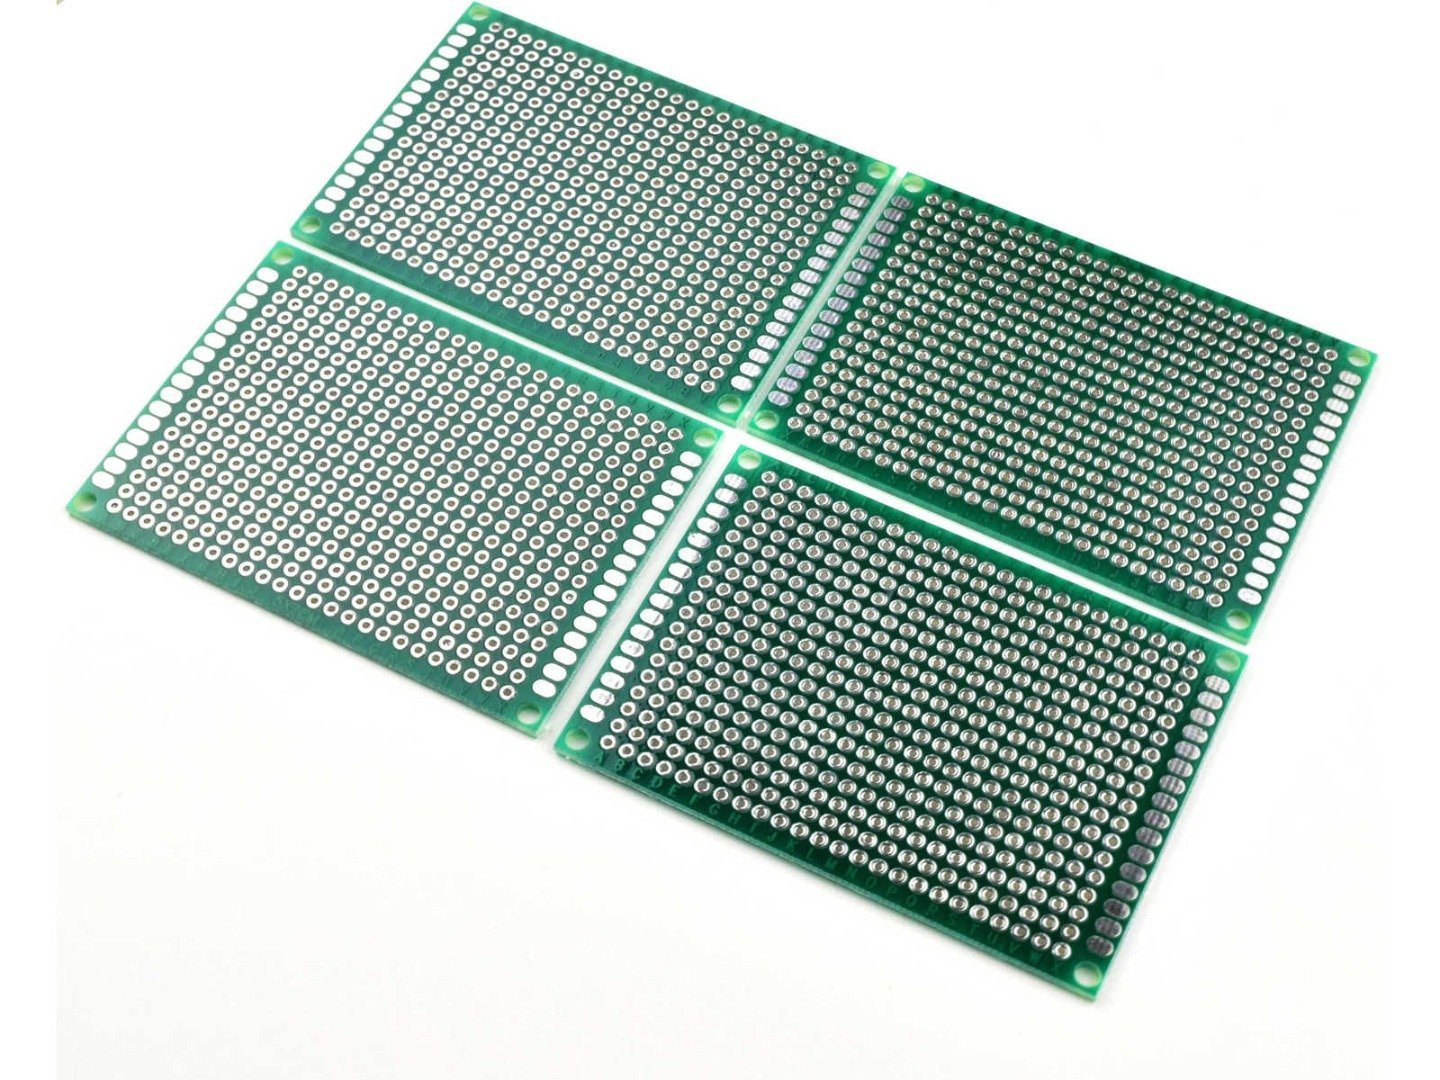 4 x Double Sided Perforated Prototyping PCB 50 x 70 mm 4